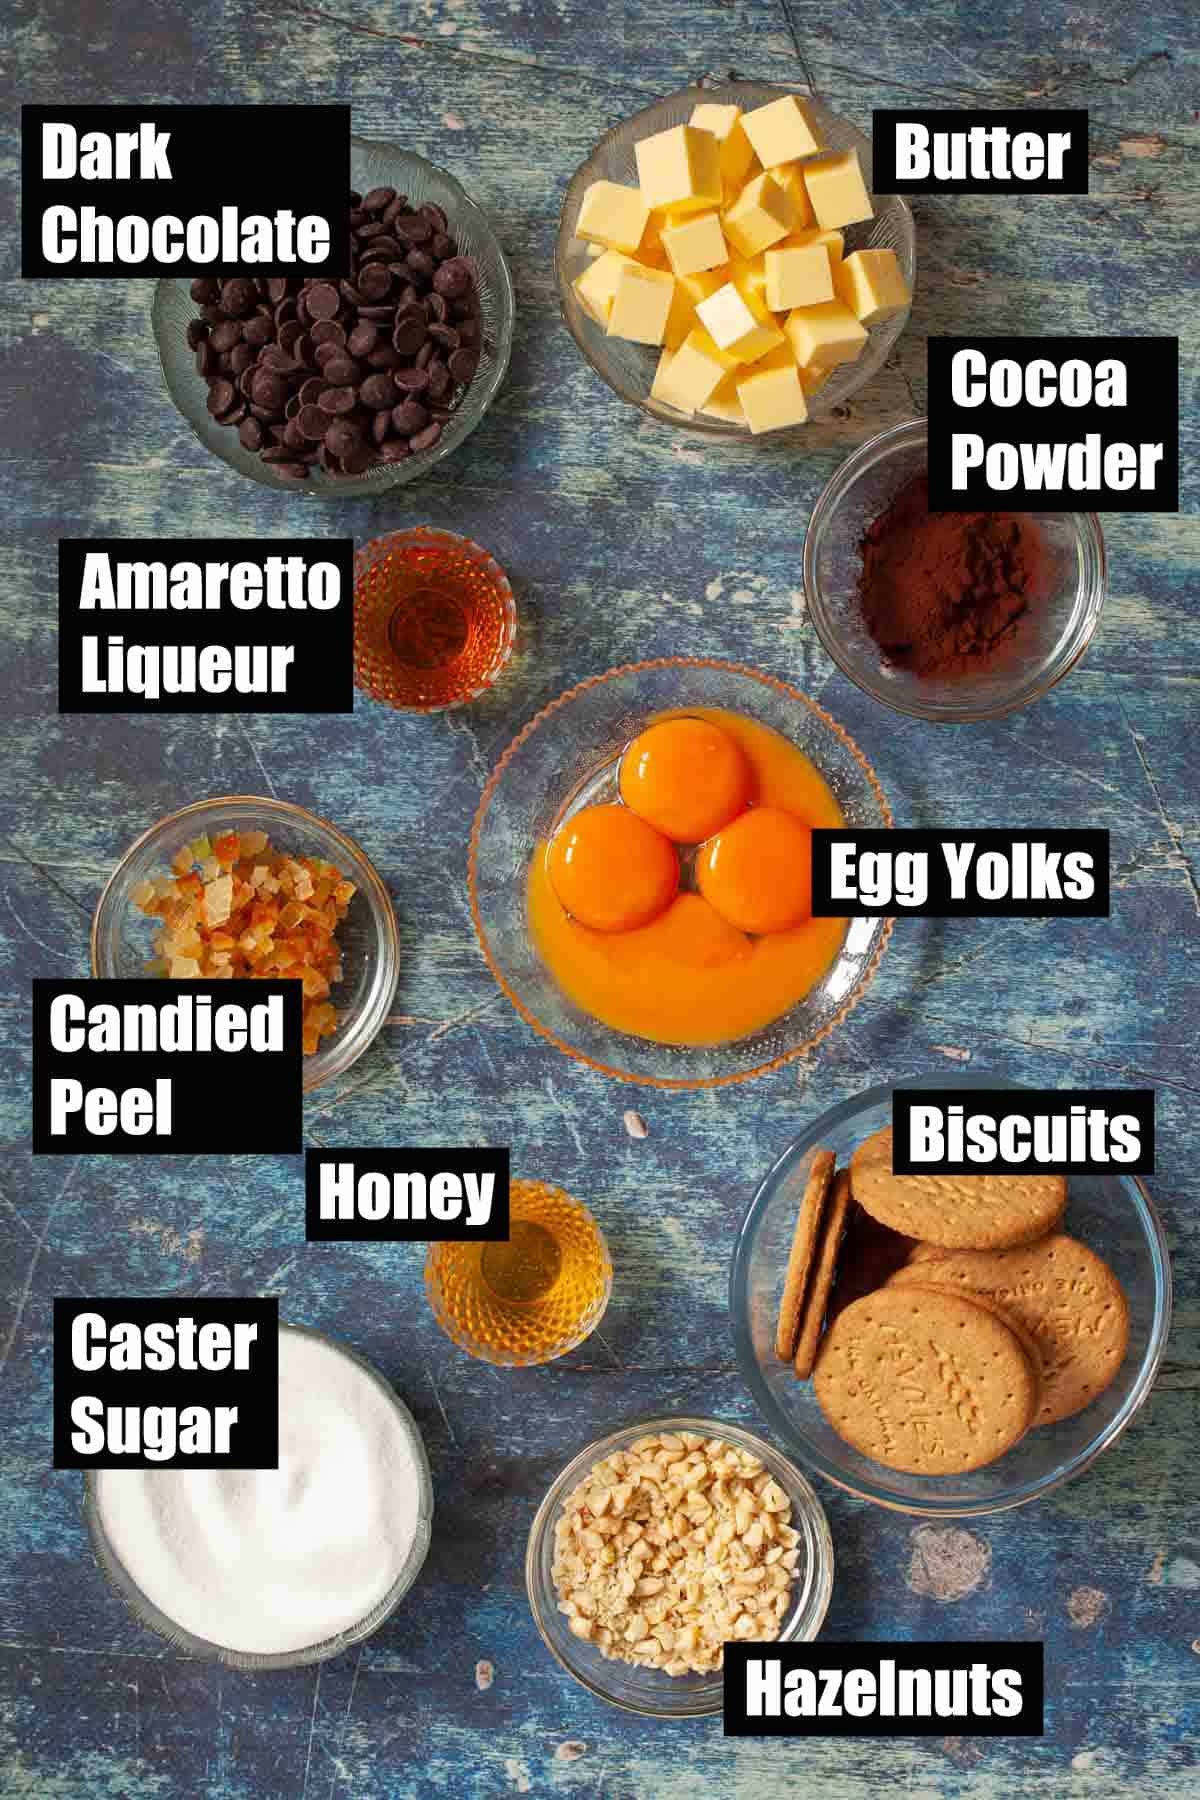 Ingredients for chocolate sausage with text overlay.